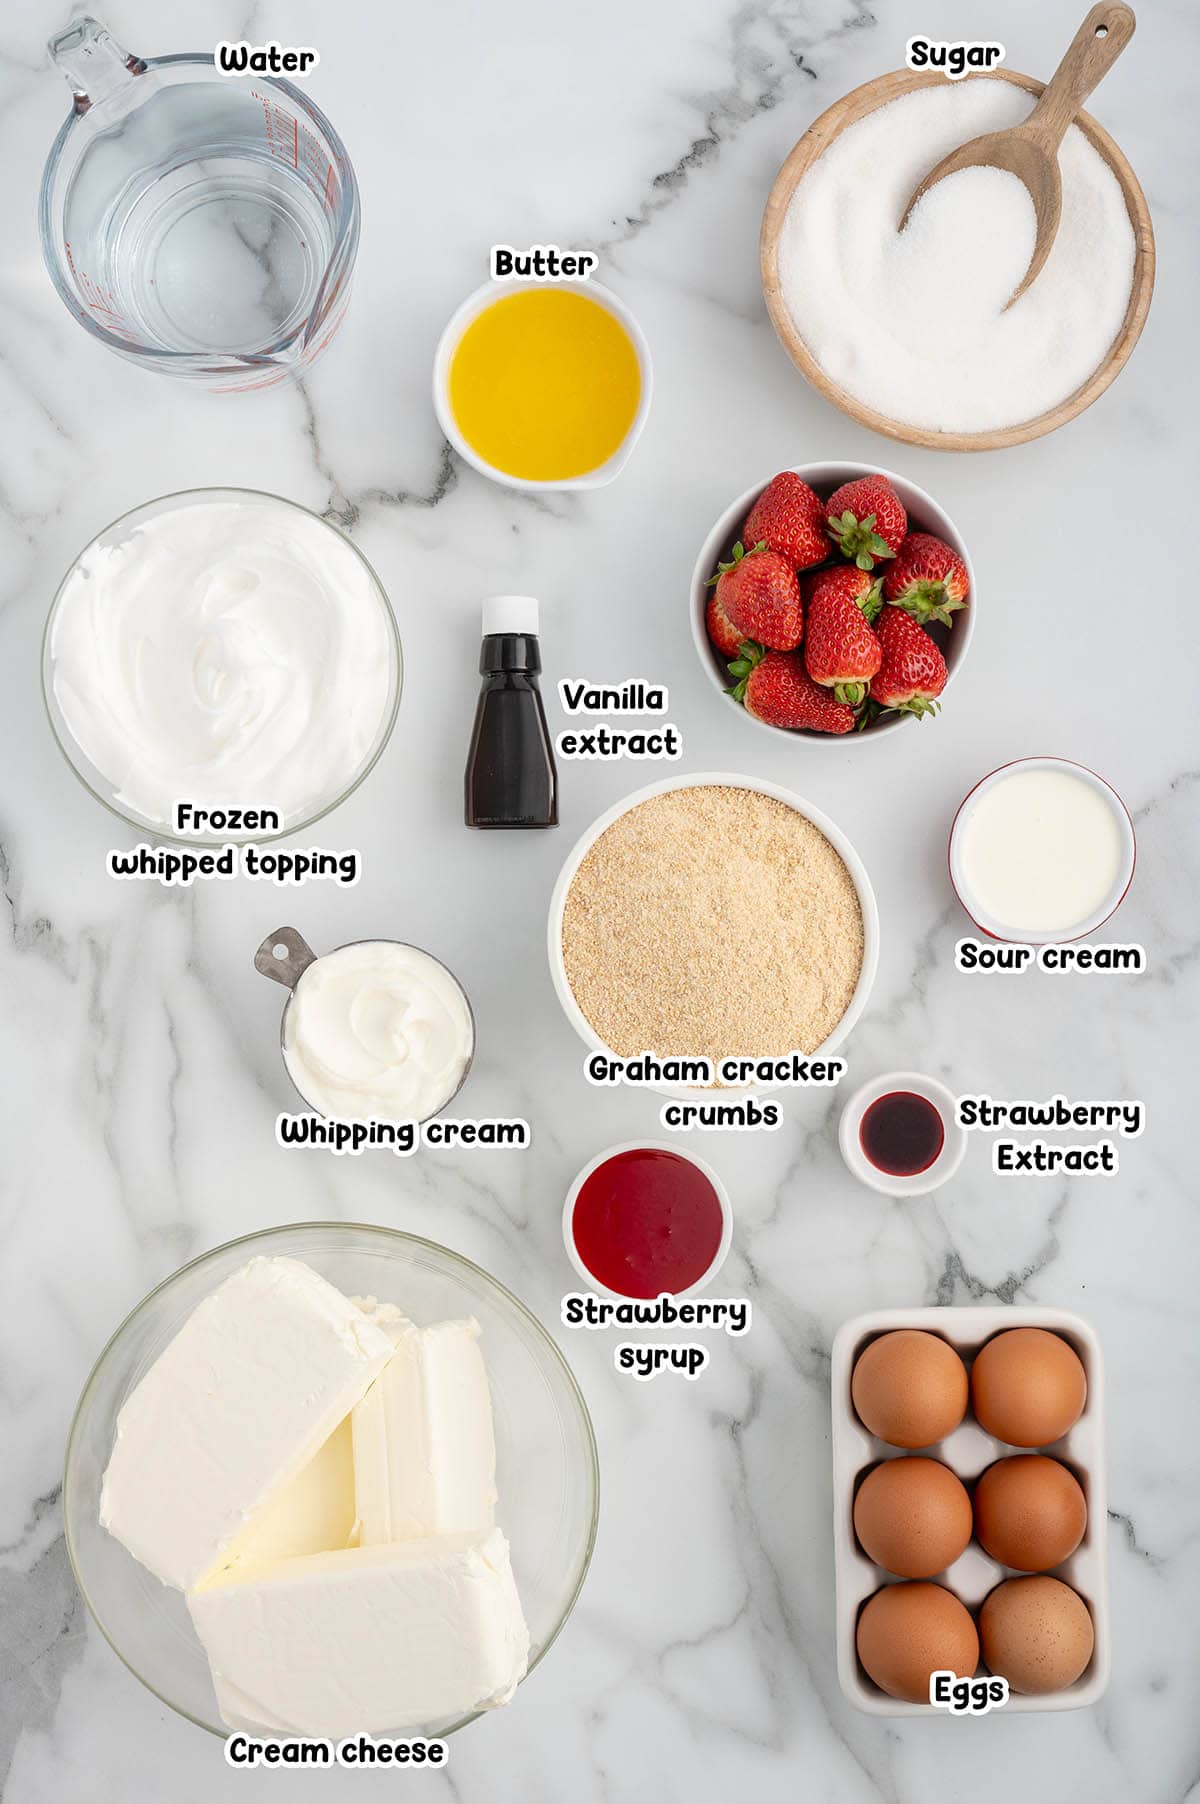 Strawberries and Cream Cheesecake ingredients.